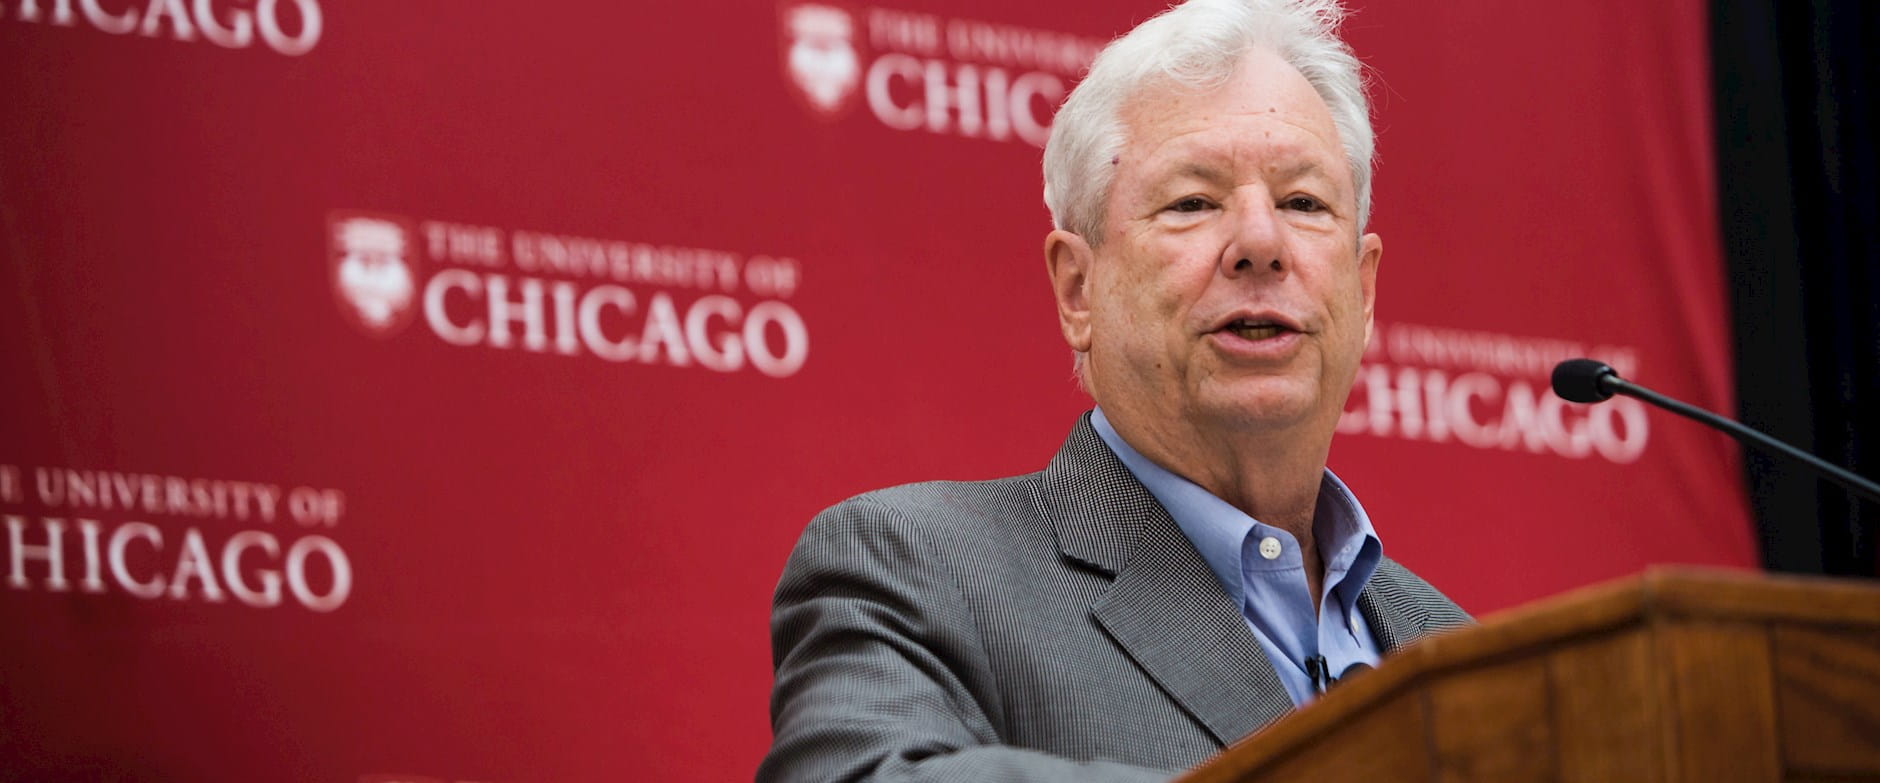 Chicago Booth Professor Richard Thaler standing at a podium, speaking after winning the 2017 Nobel Prize in Economics before a press conference at Harper